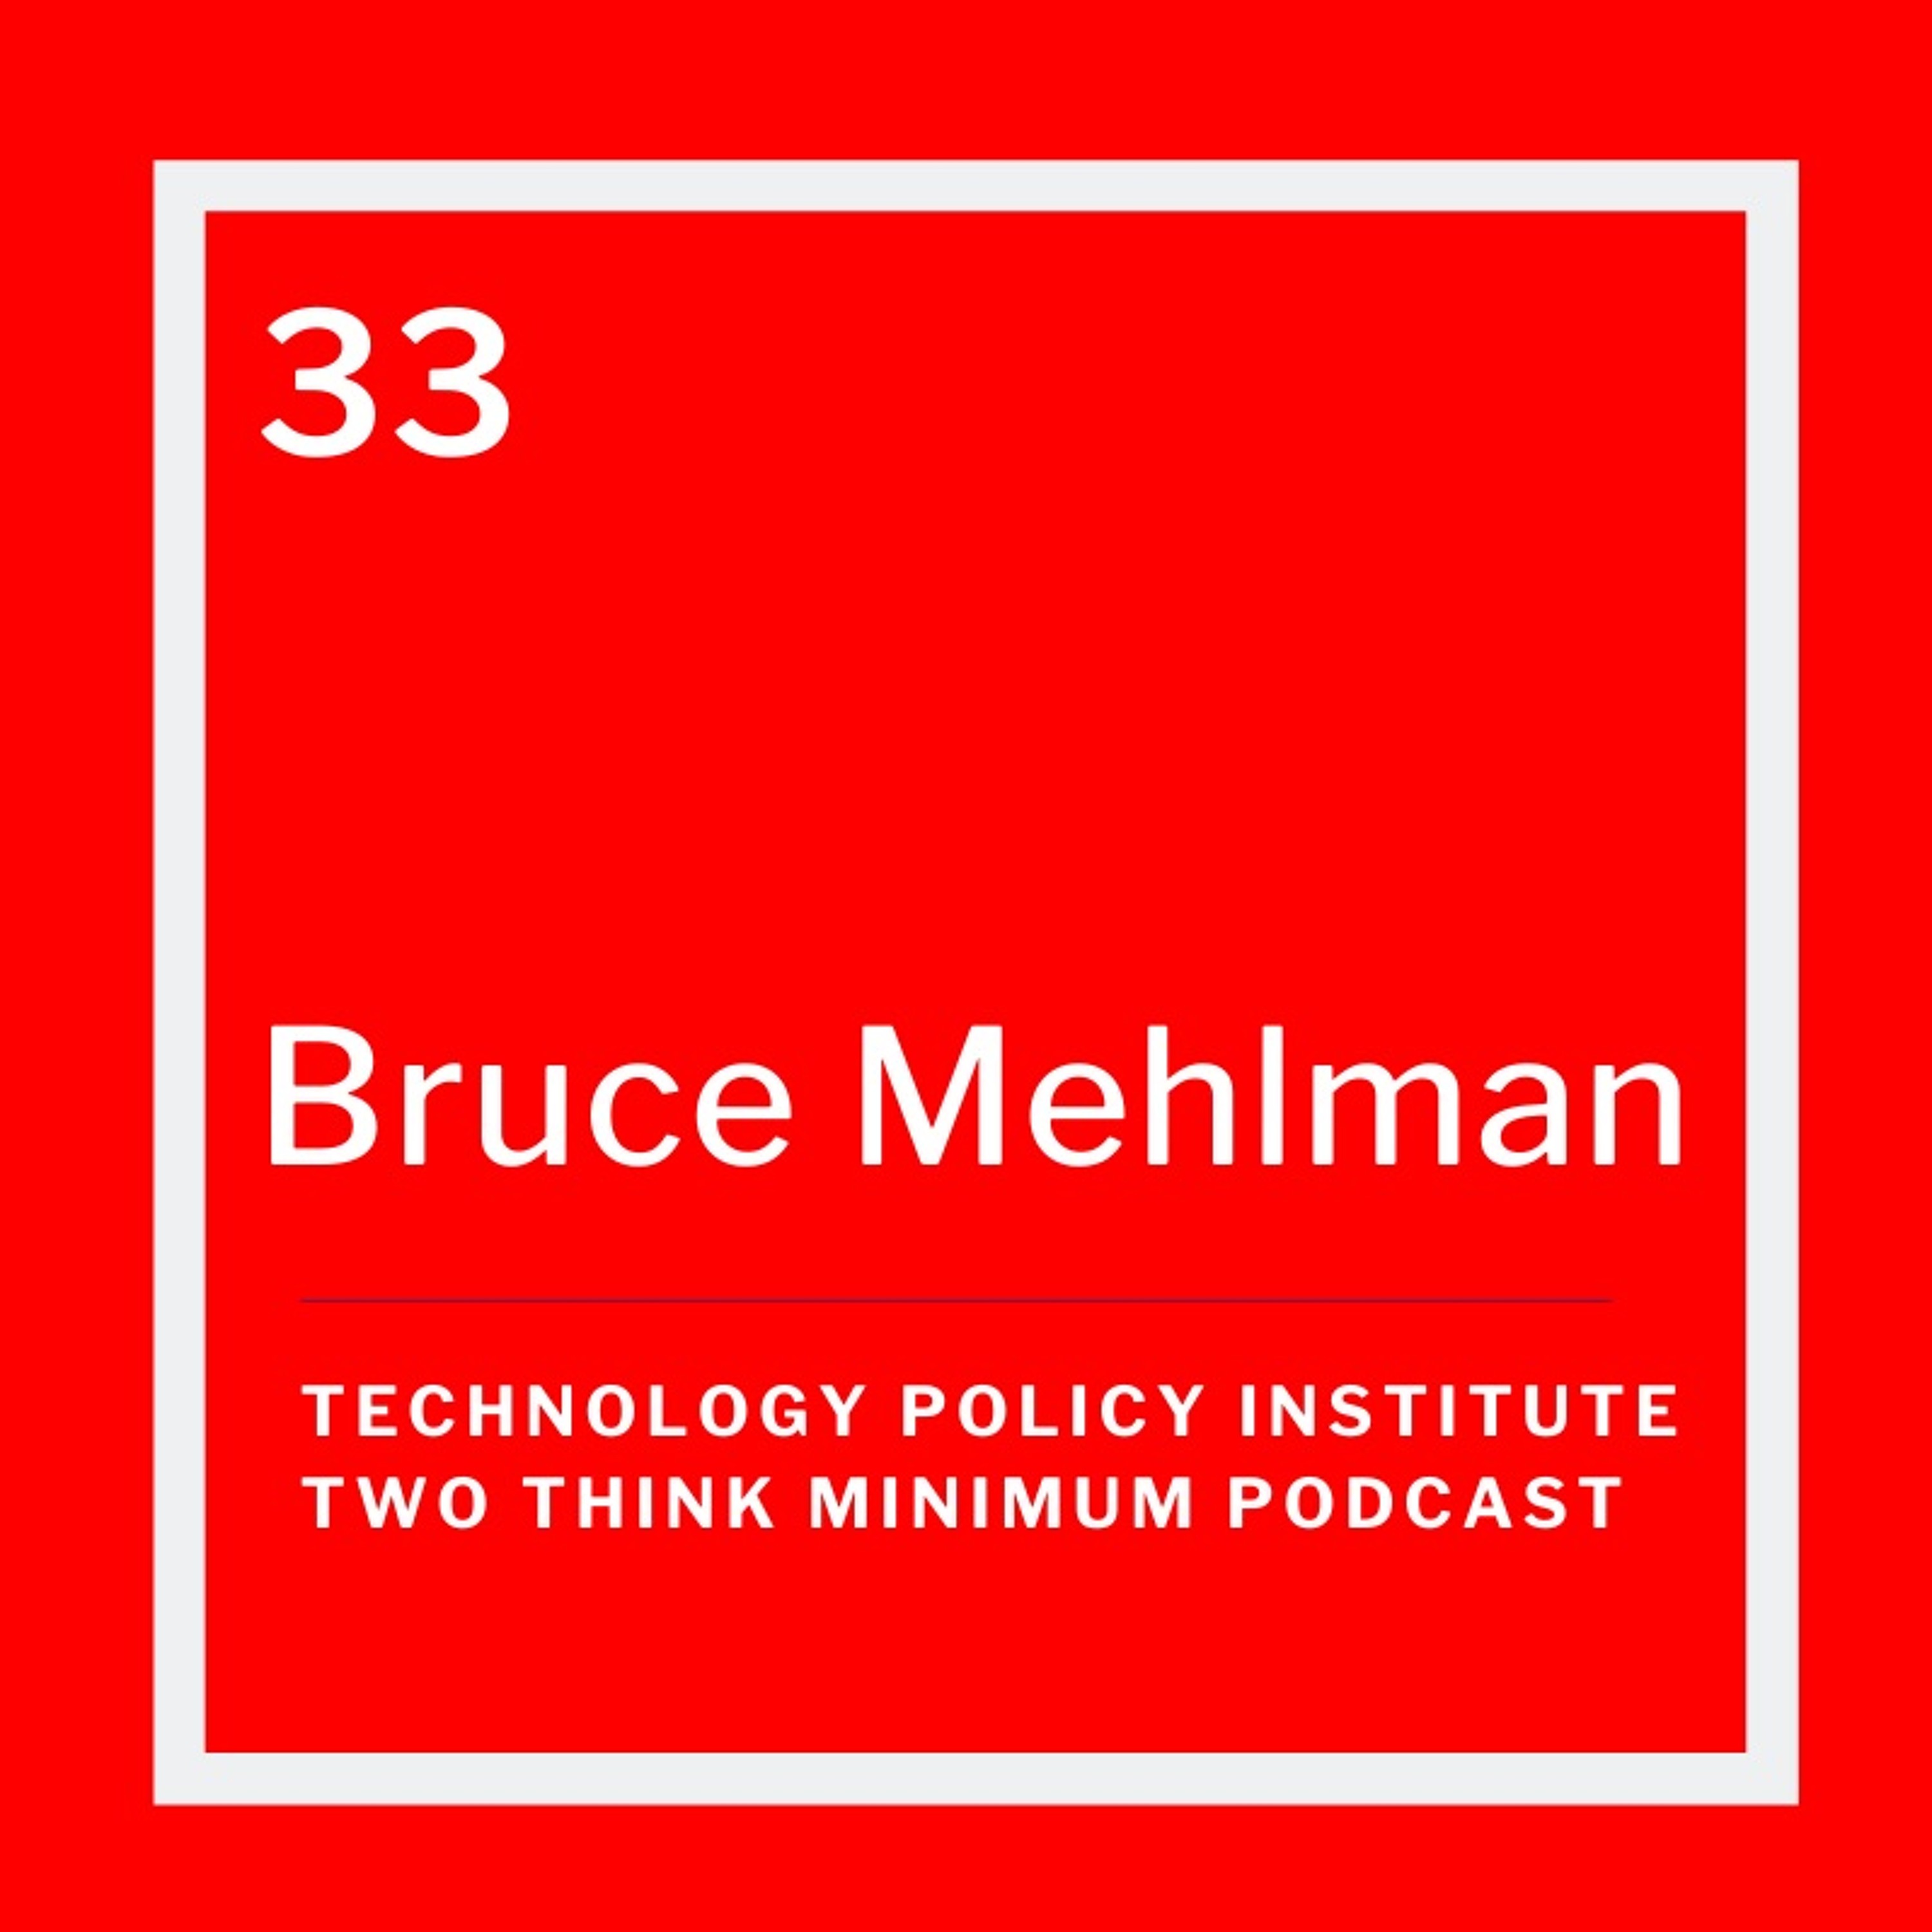 Bruce Mehlman on 2020’s Tech Policy Knowns and Unknowns